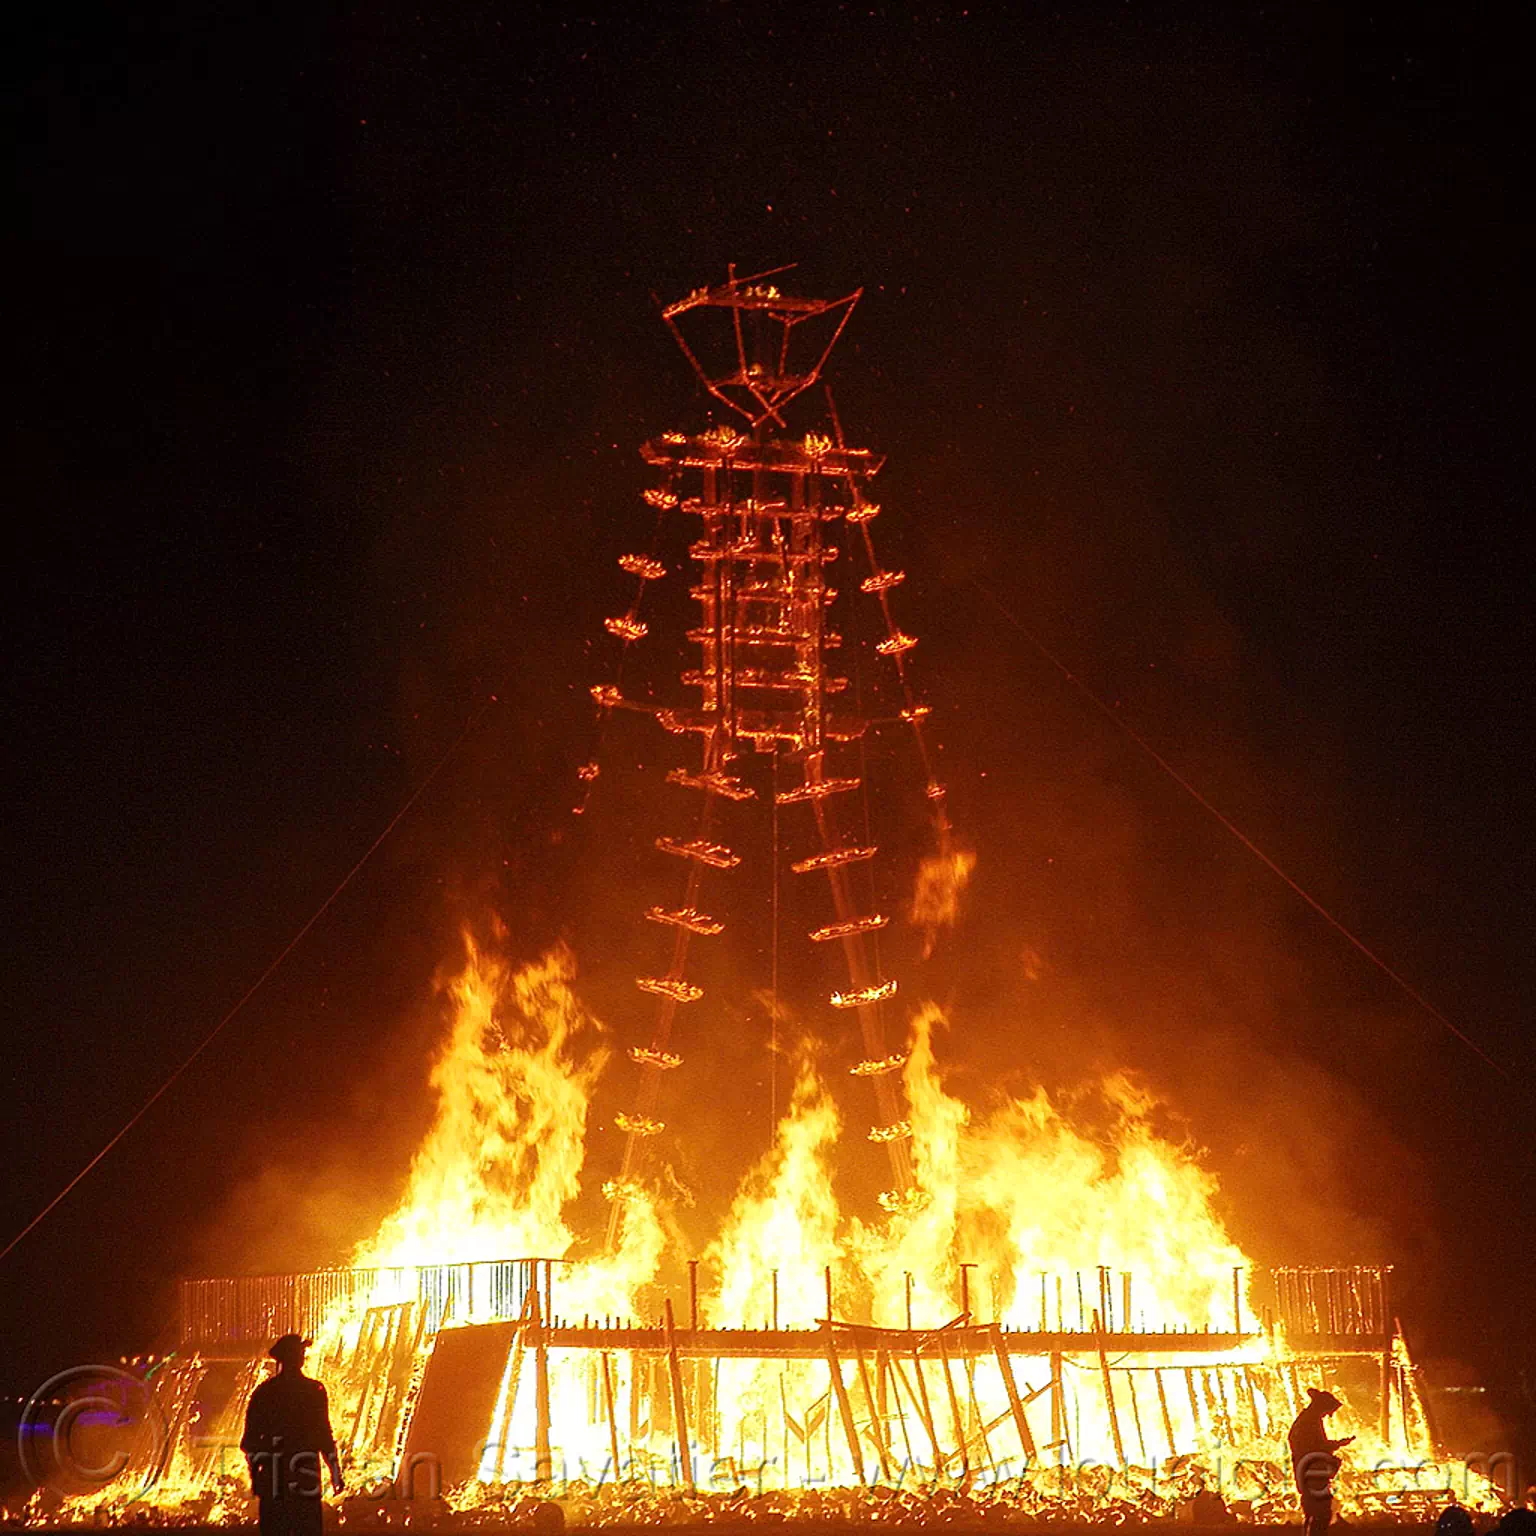 the burnt frame of the man is still standing - burning man 2015, burning man, chared, embers, fire, frame, night of the burn, silhouettes, the man